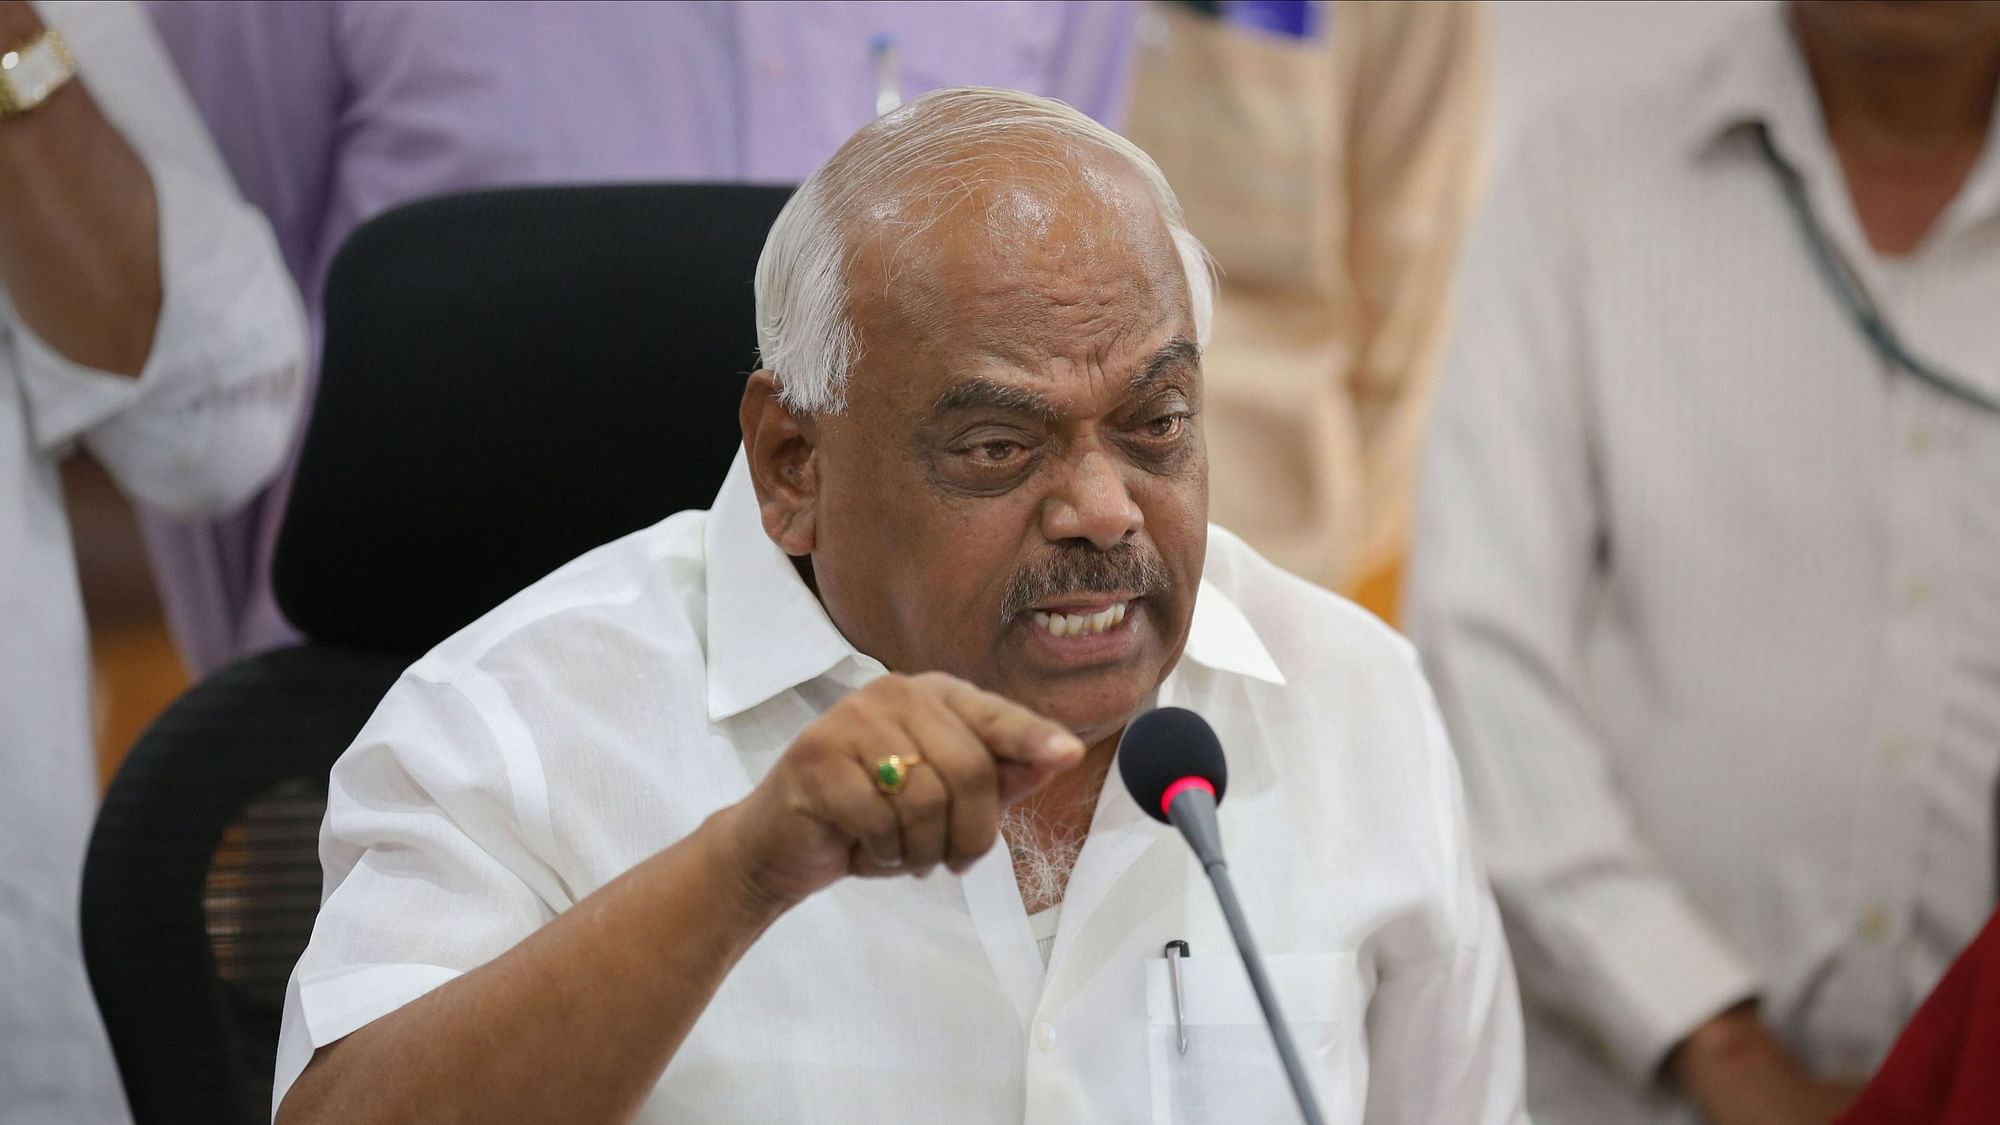 KR Ramesh Kumar had on Monday, 29 July resigned after the House adopted the confidence motion moved by Karnataka CM Yediyurappa.